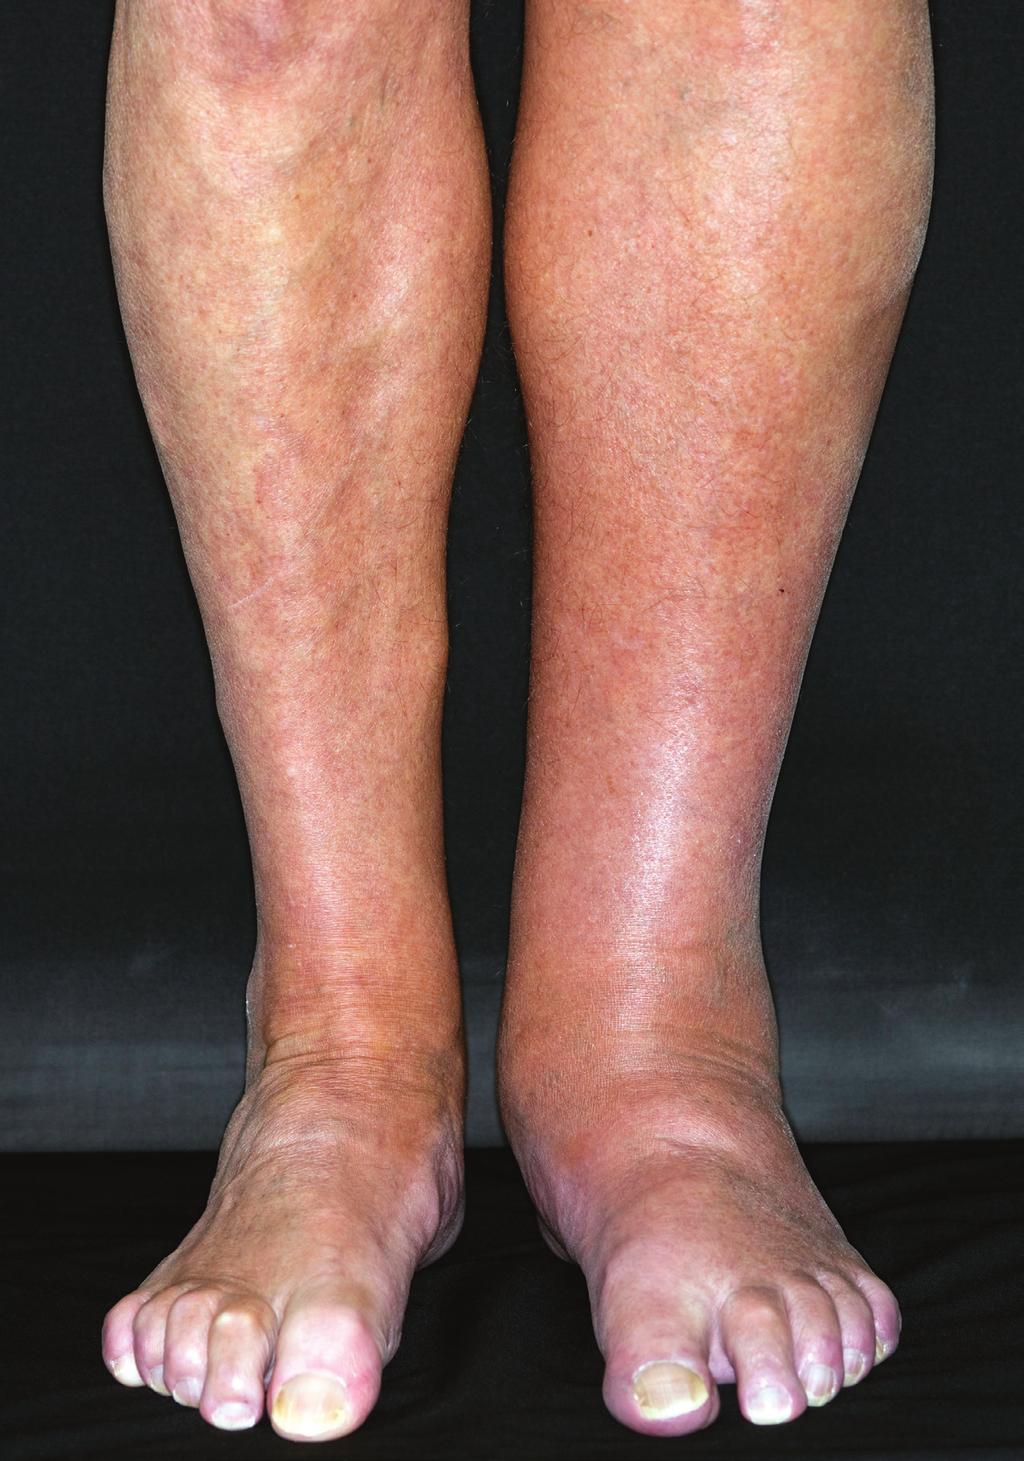 REVIEW Prevention and treatment of venous thromboembolic disease SUSAN McNEILL AND CATHERINE BAGOT Awareness of the risk factors for venous thromboembolic (VTE) disease and timely administration of